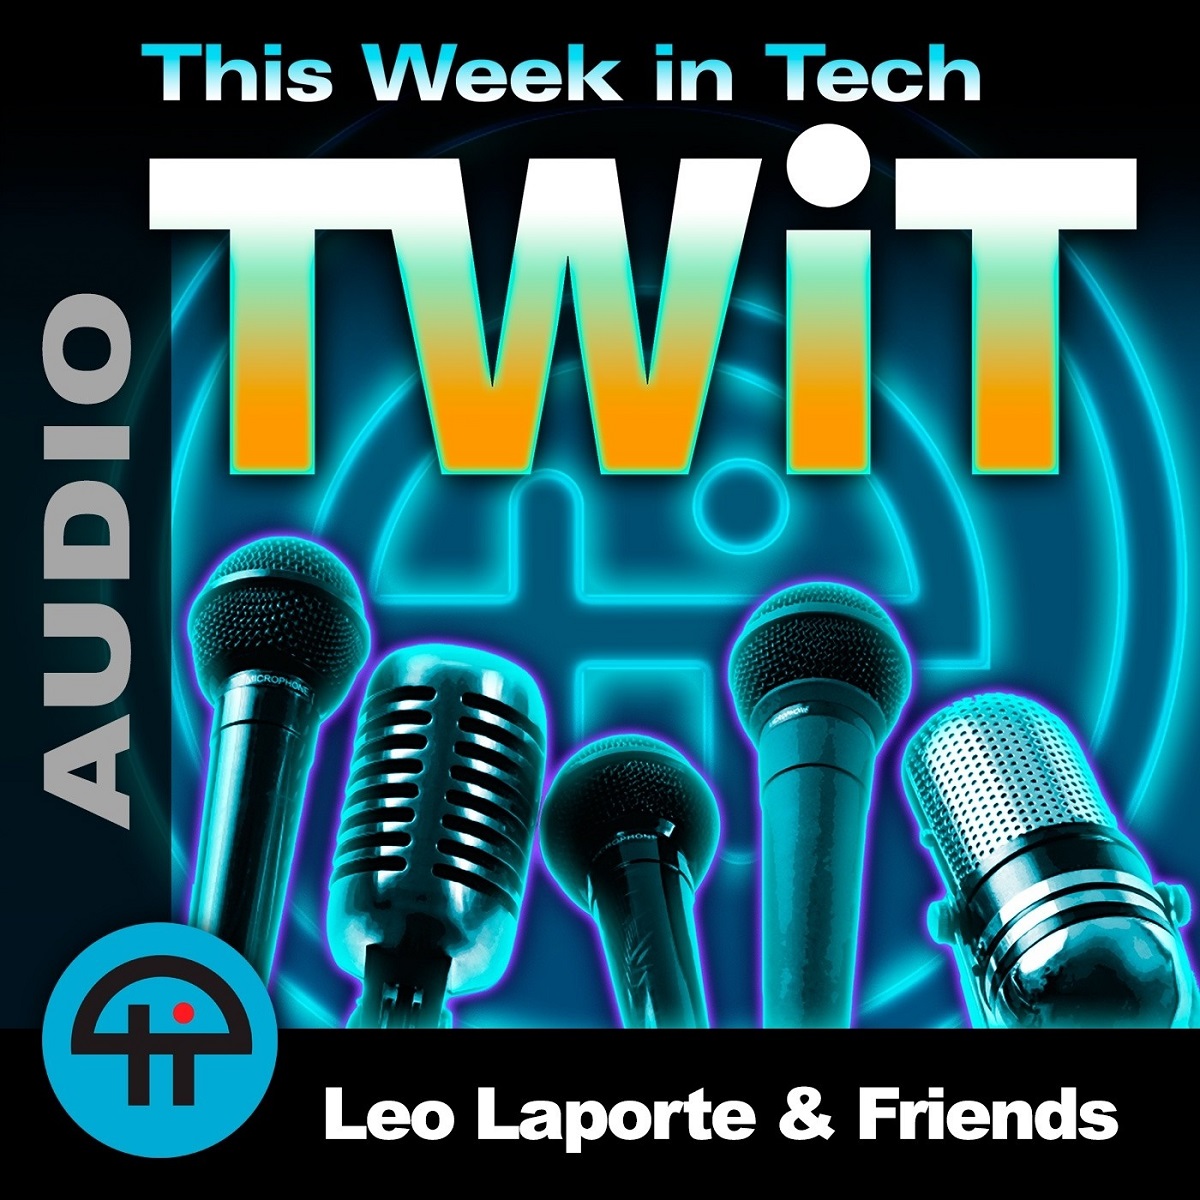 This week in tech podcast